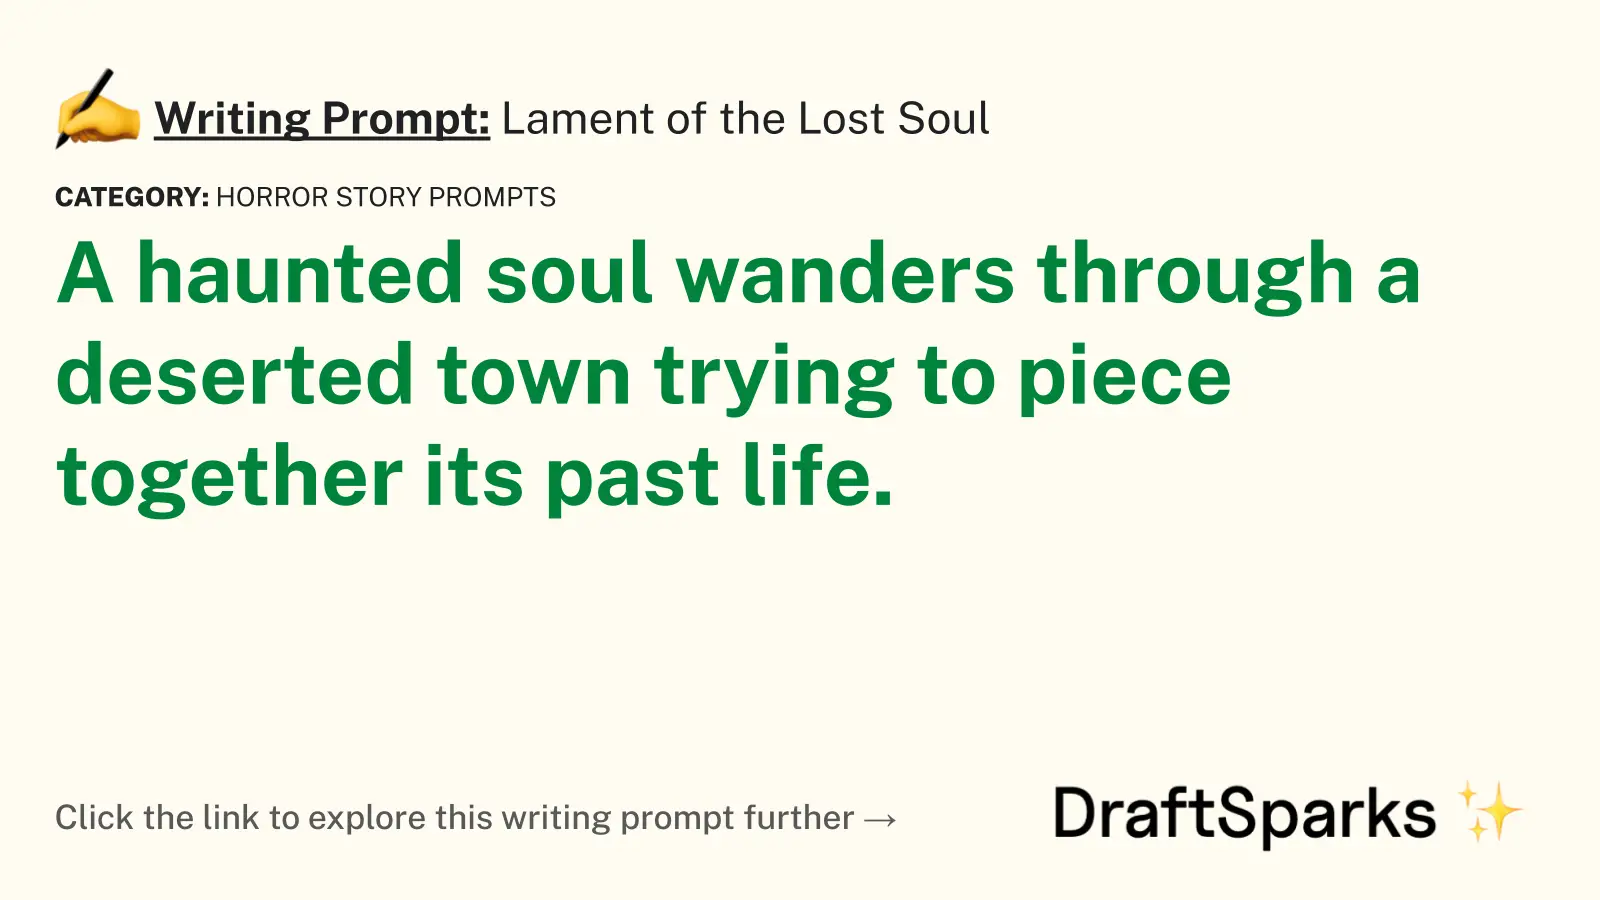 Lament of the Lost Soul